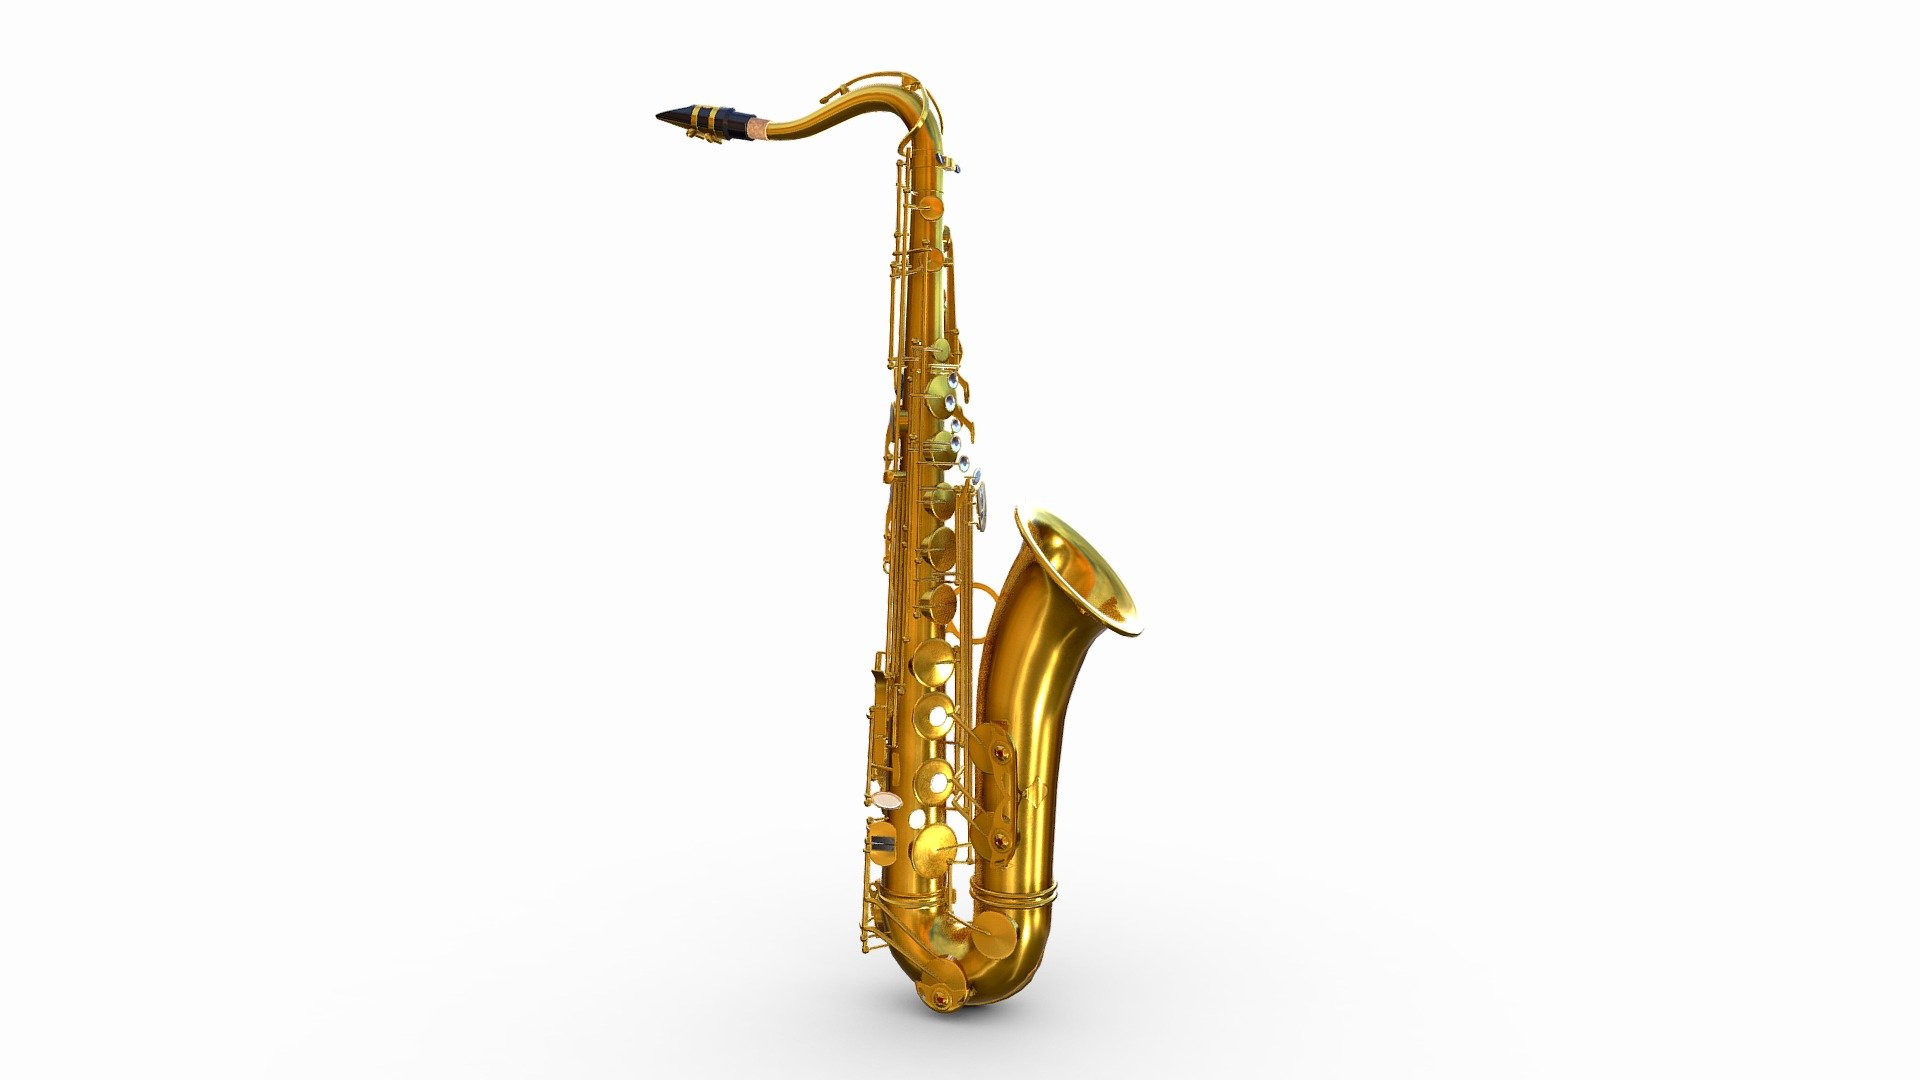 Saxophone is a reed wind instrument.

This musical instrument can be suitable for any musical game in which you can use this asset.

MODEL




Polys: 19150

Verts: 19048

TEXTURES




Albedo

Normal

Metallic

Roughness

AmbientOcclusion

(PBR workflow)

4096x4096 high resolution texture sets are made according to the working process PBR 3d model